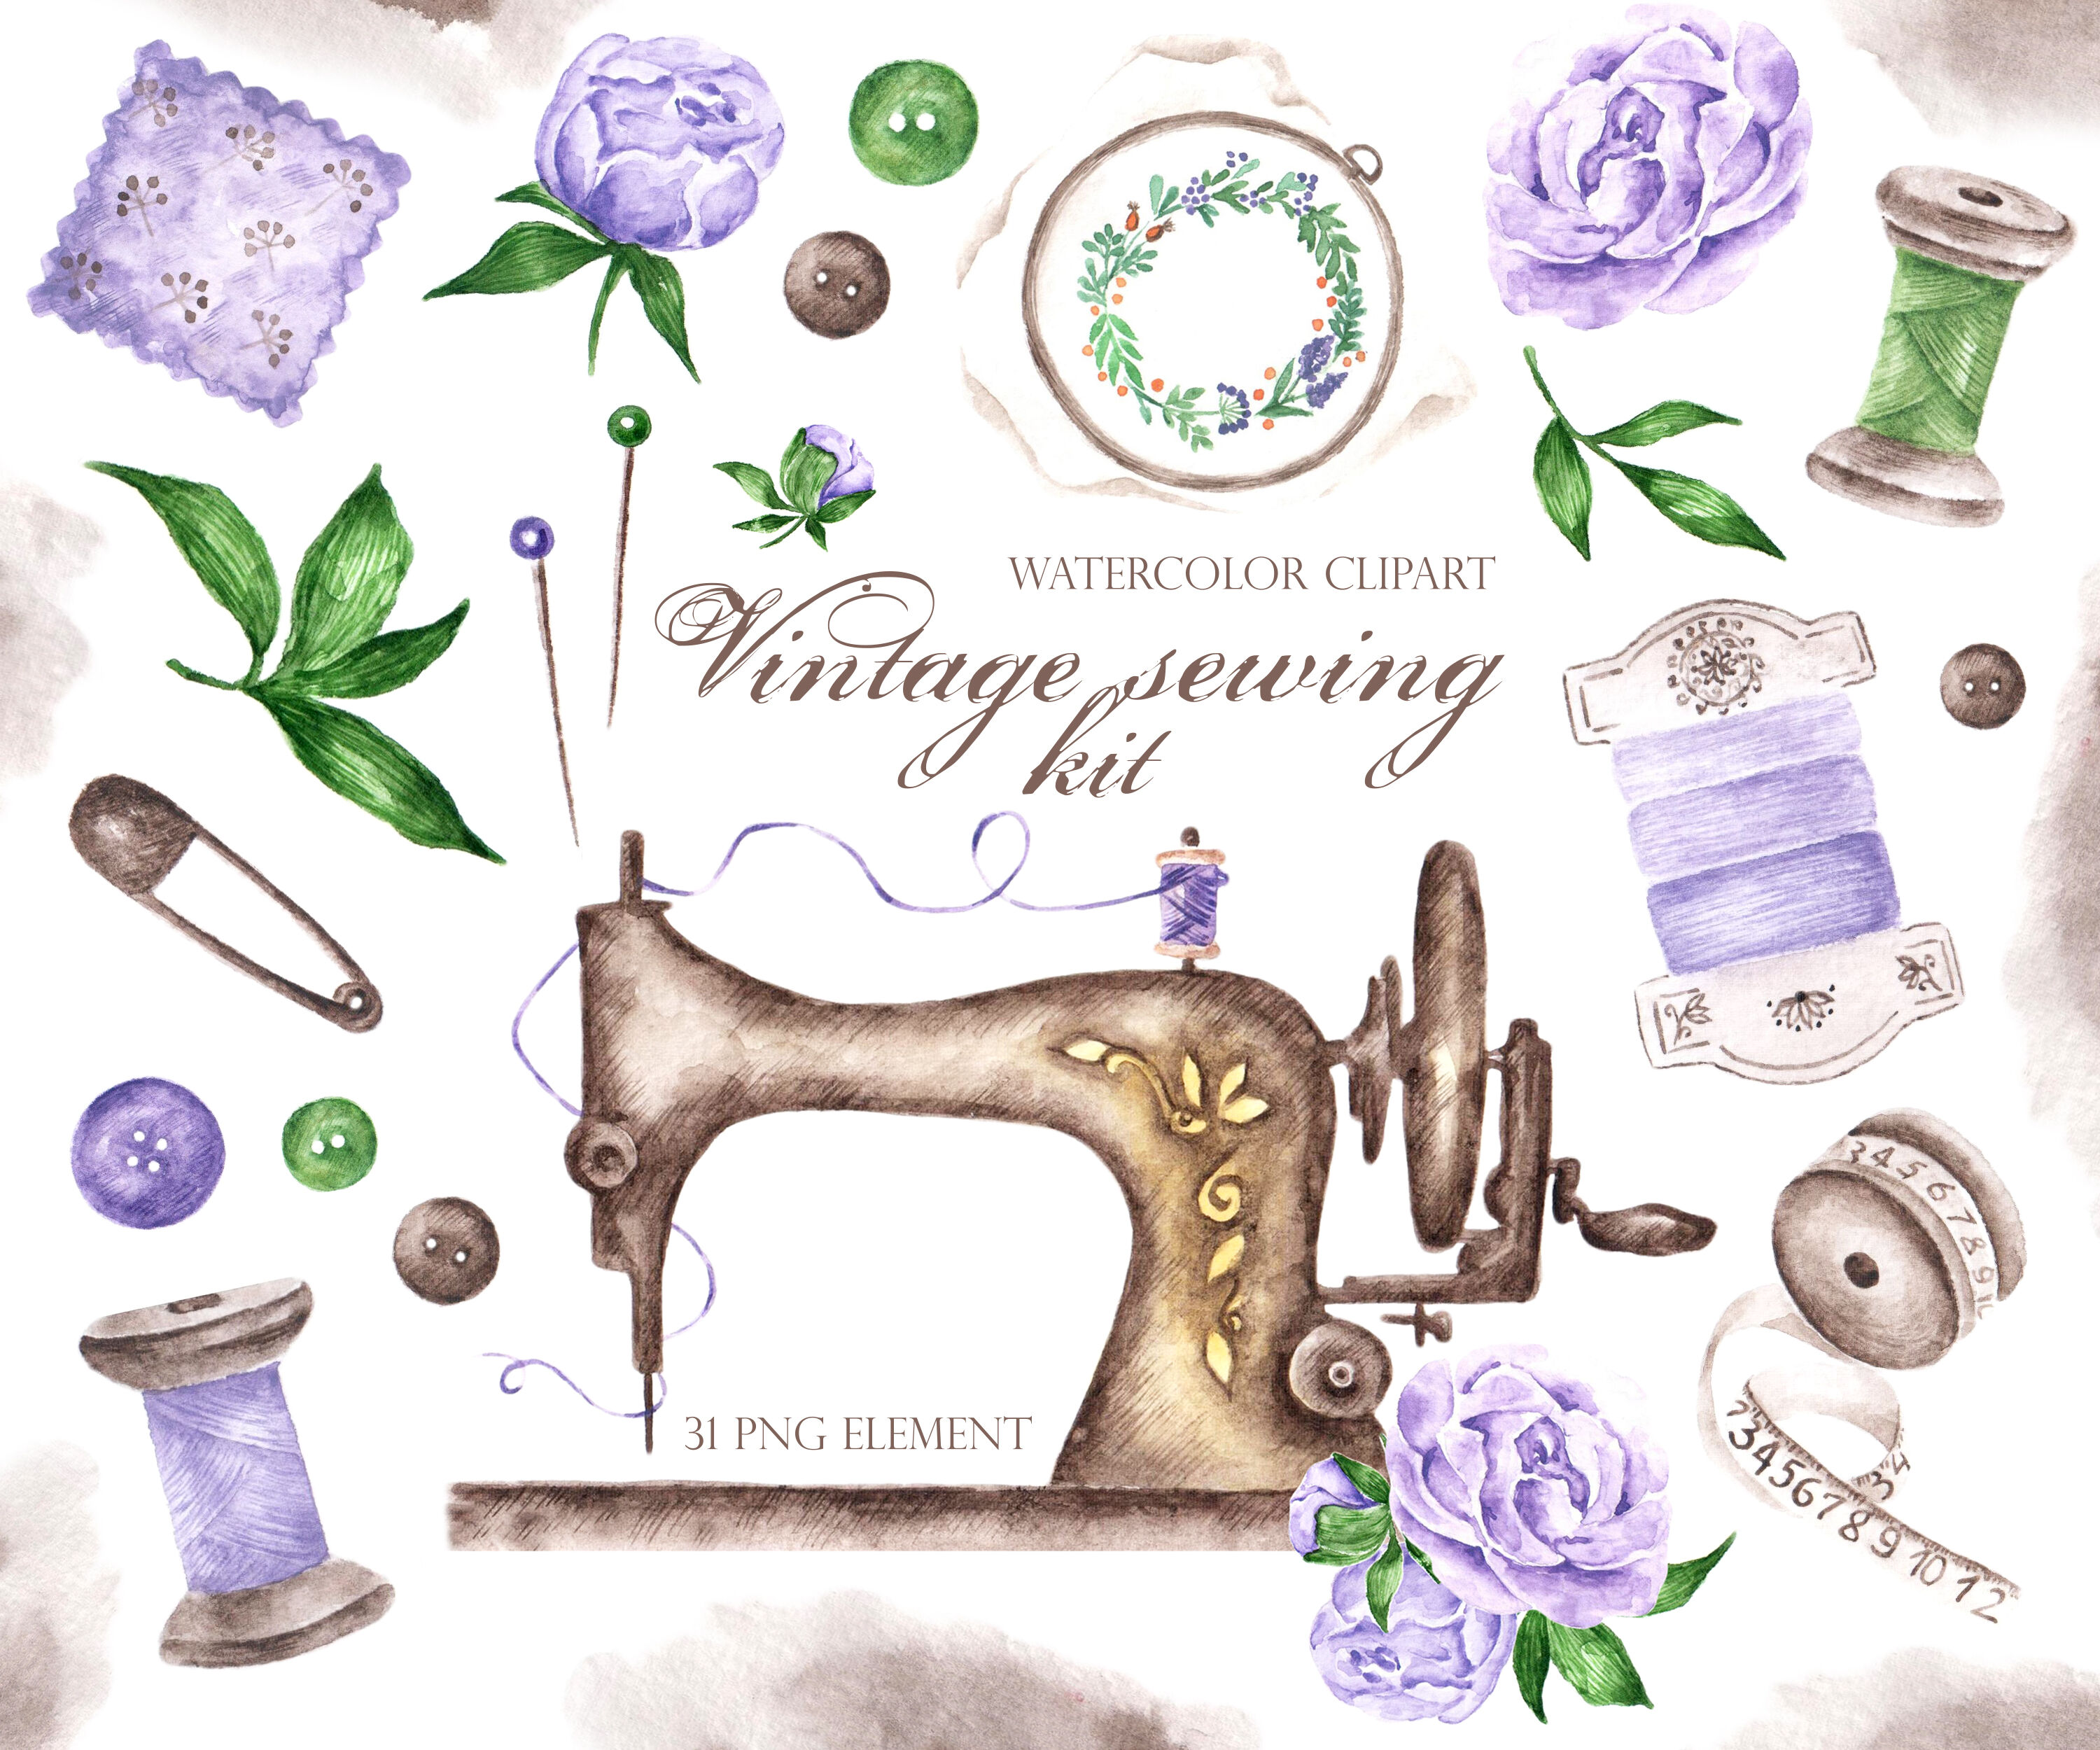 Watercolor clipart Sewing kit. PNG format. Sewing machine clipart. By  illustrator Sabina Z